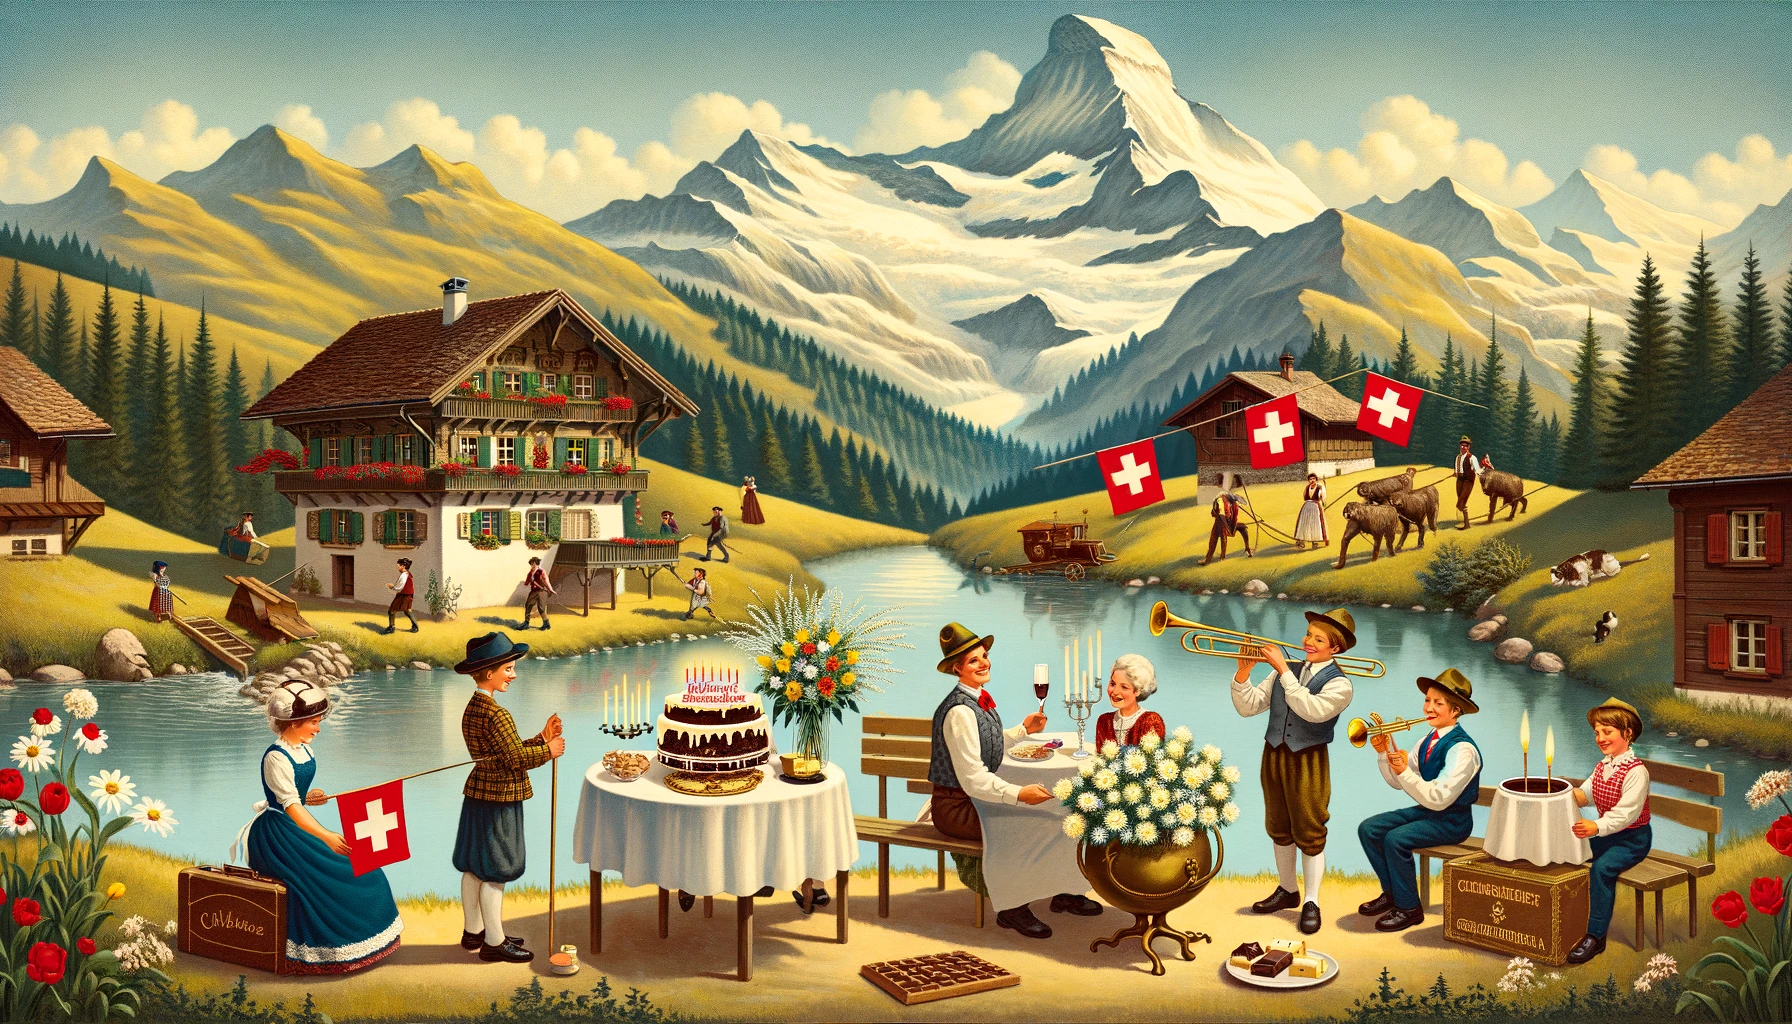 DALL·E 2024 03 06 13.20.24 A charming and picturesque scene illustrating various ways to wish someone a happy birthday in Switzerland. The image features a serene landscape with